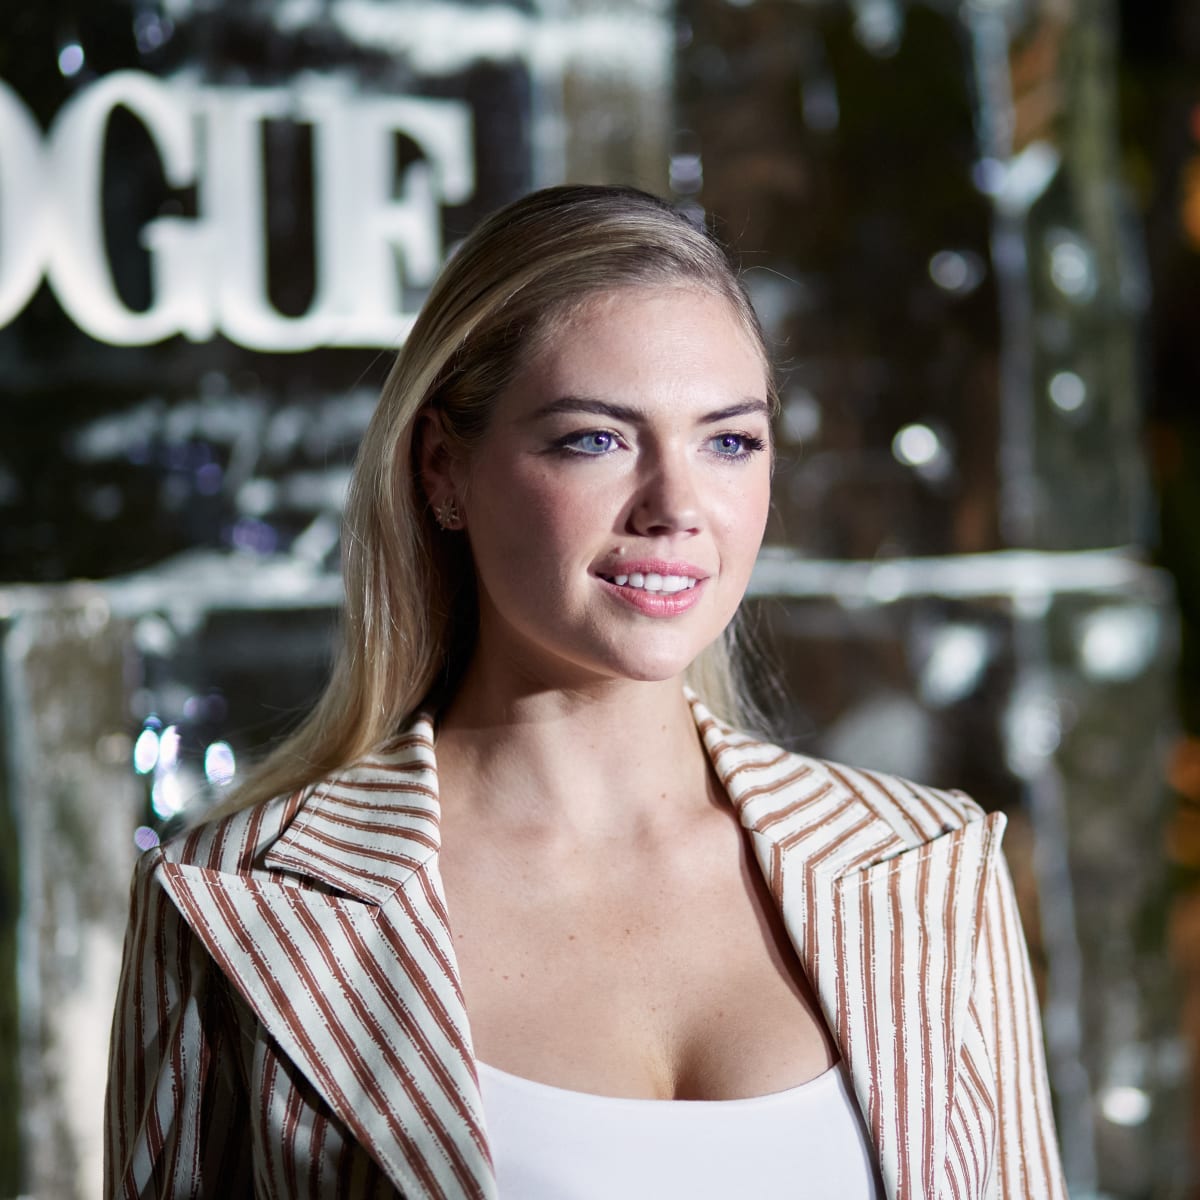 Kate Upton Has Joking Exchange With Phillies Fans at World Series - Sports  Illustrated Lifestyle